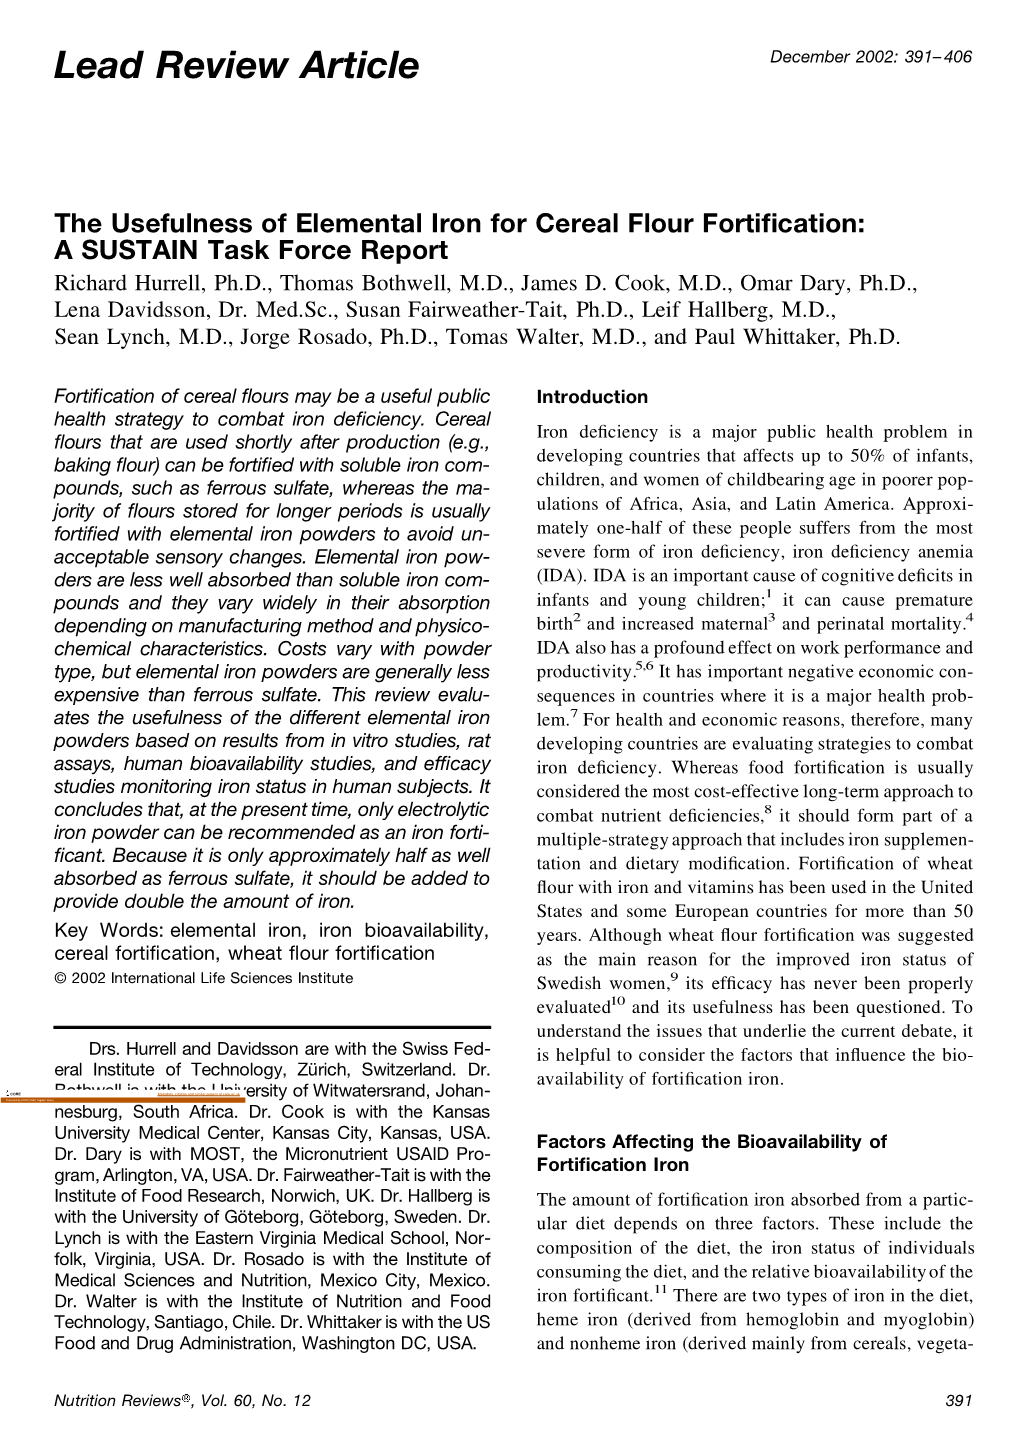 The Usefulness of Elemental Iron for Cereal Flour Fortification